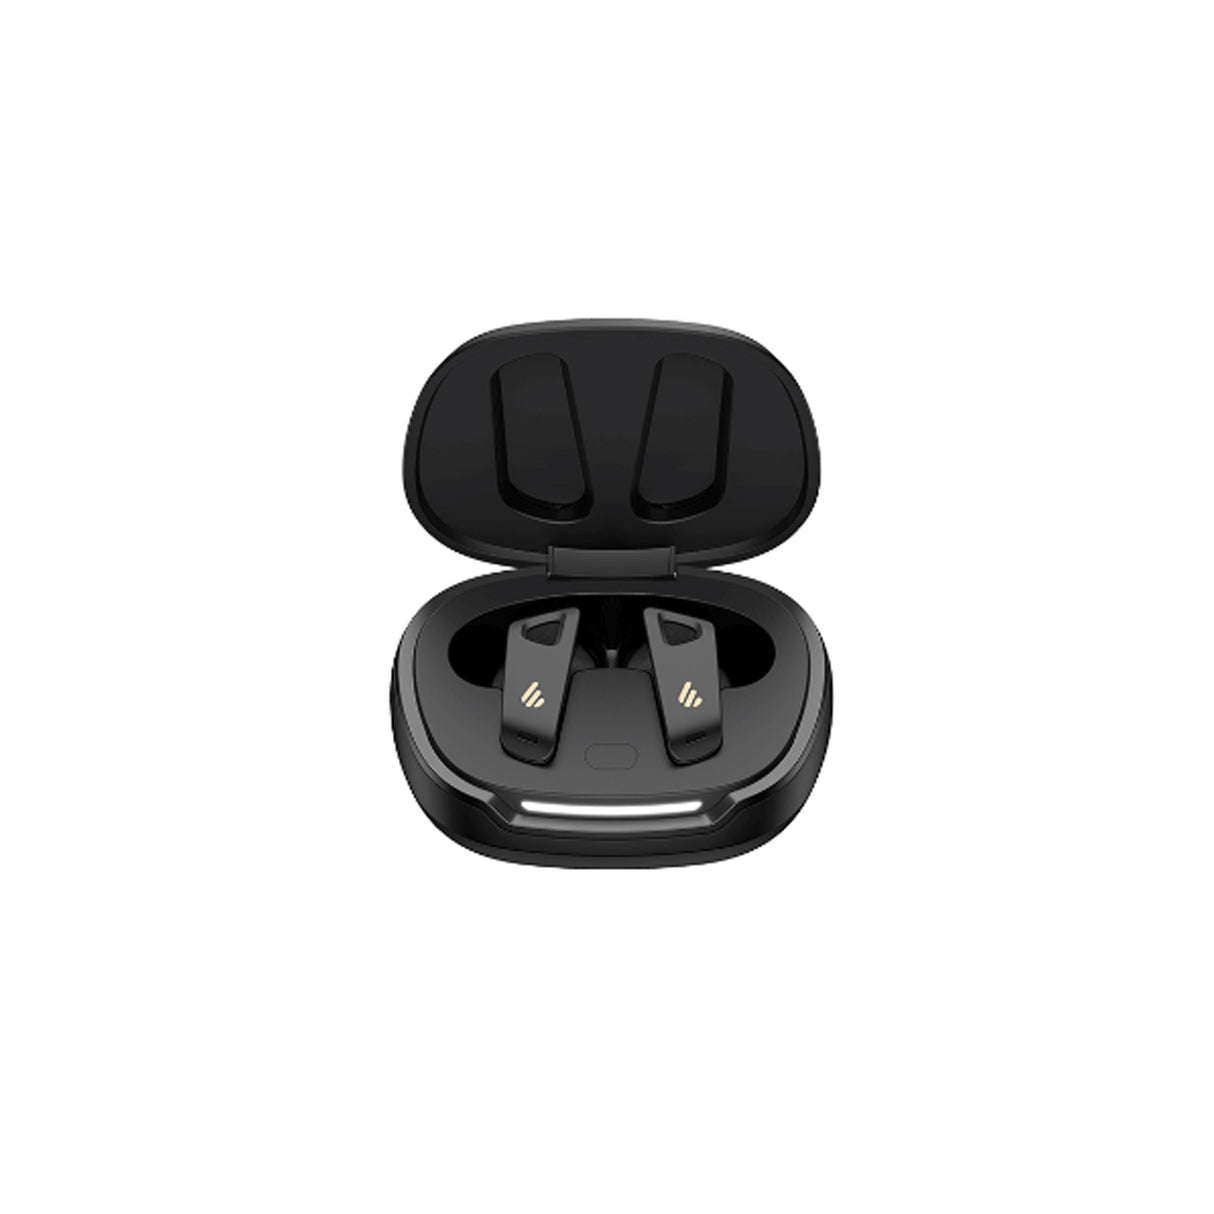 Edifier NeoBuds Pro 2 - Hi-Res True Wireless Noise Cancellation Earbuds (Black)